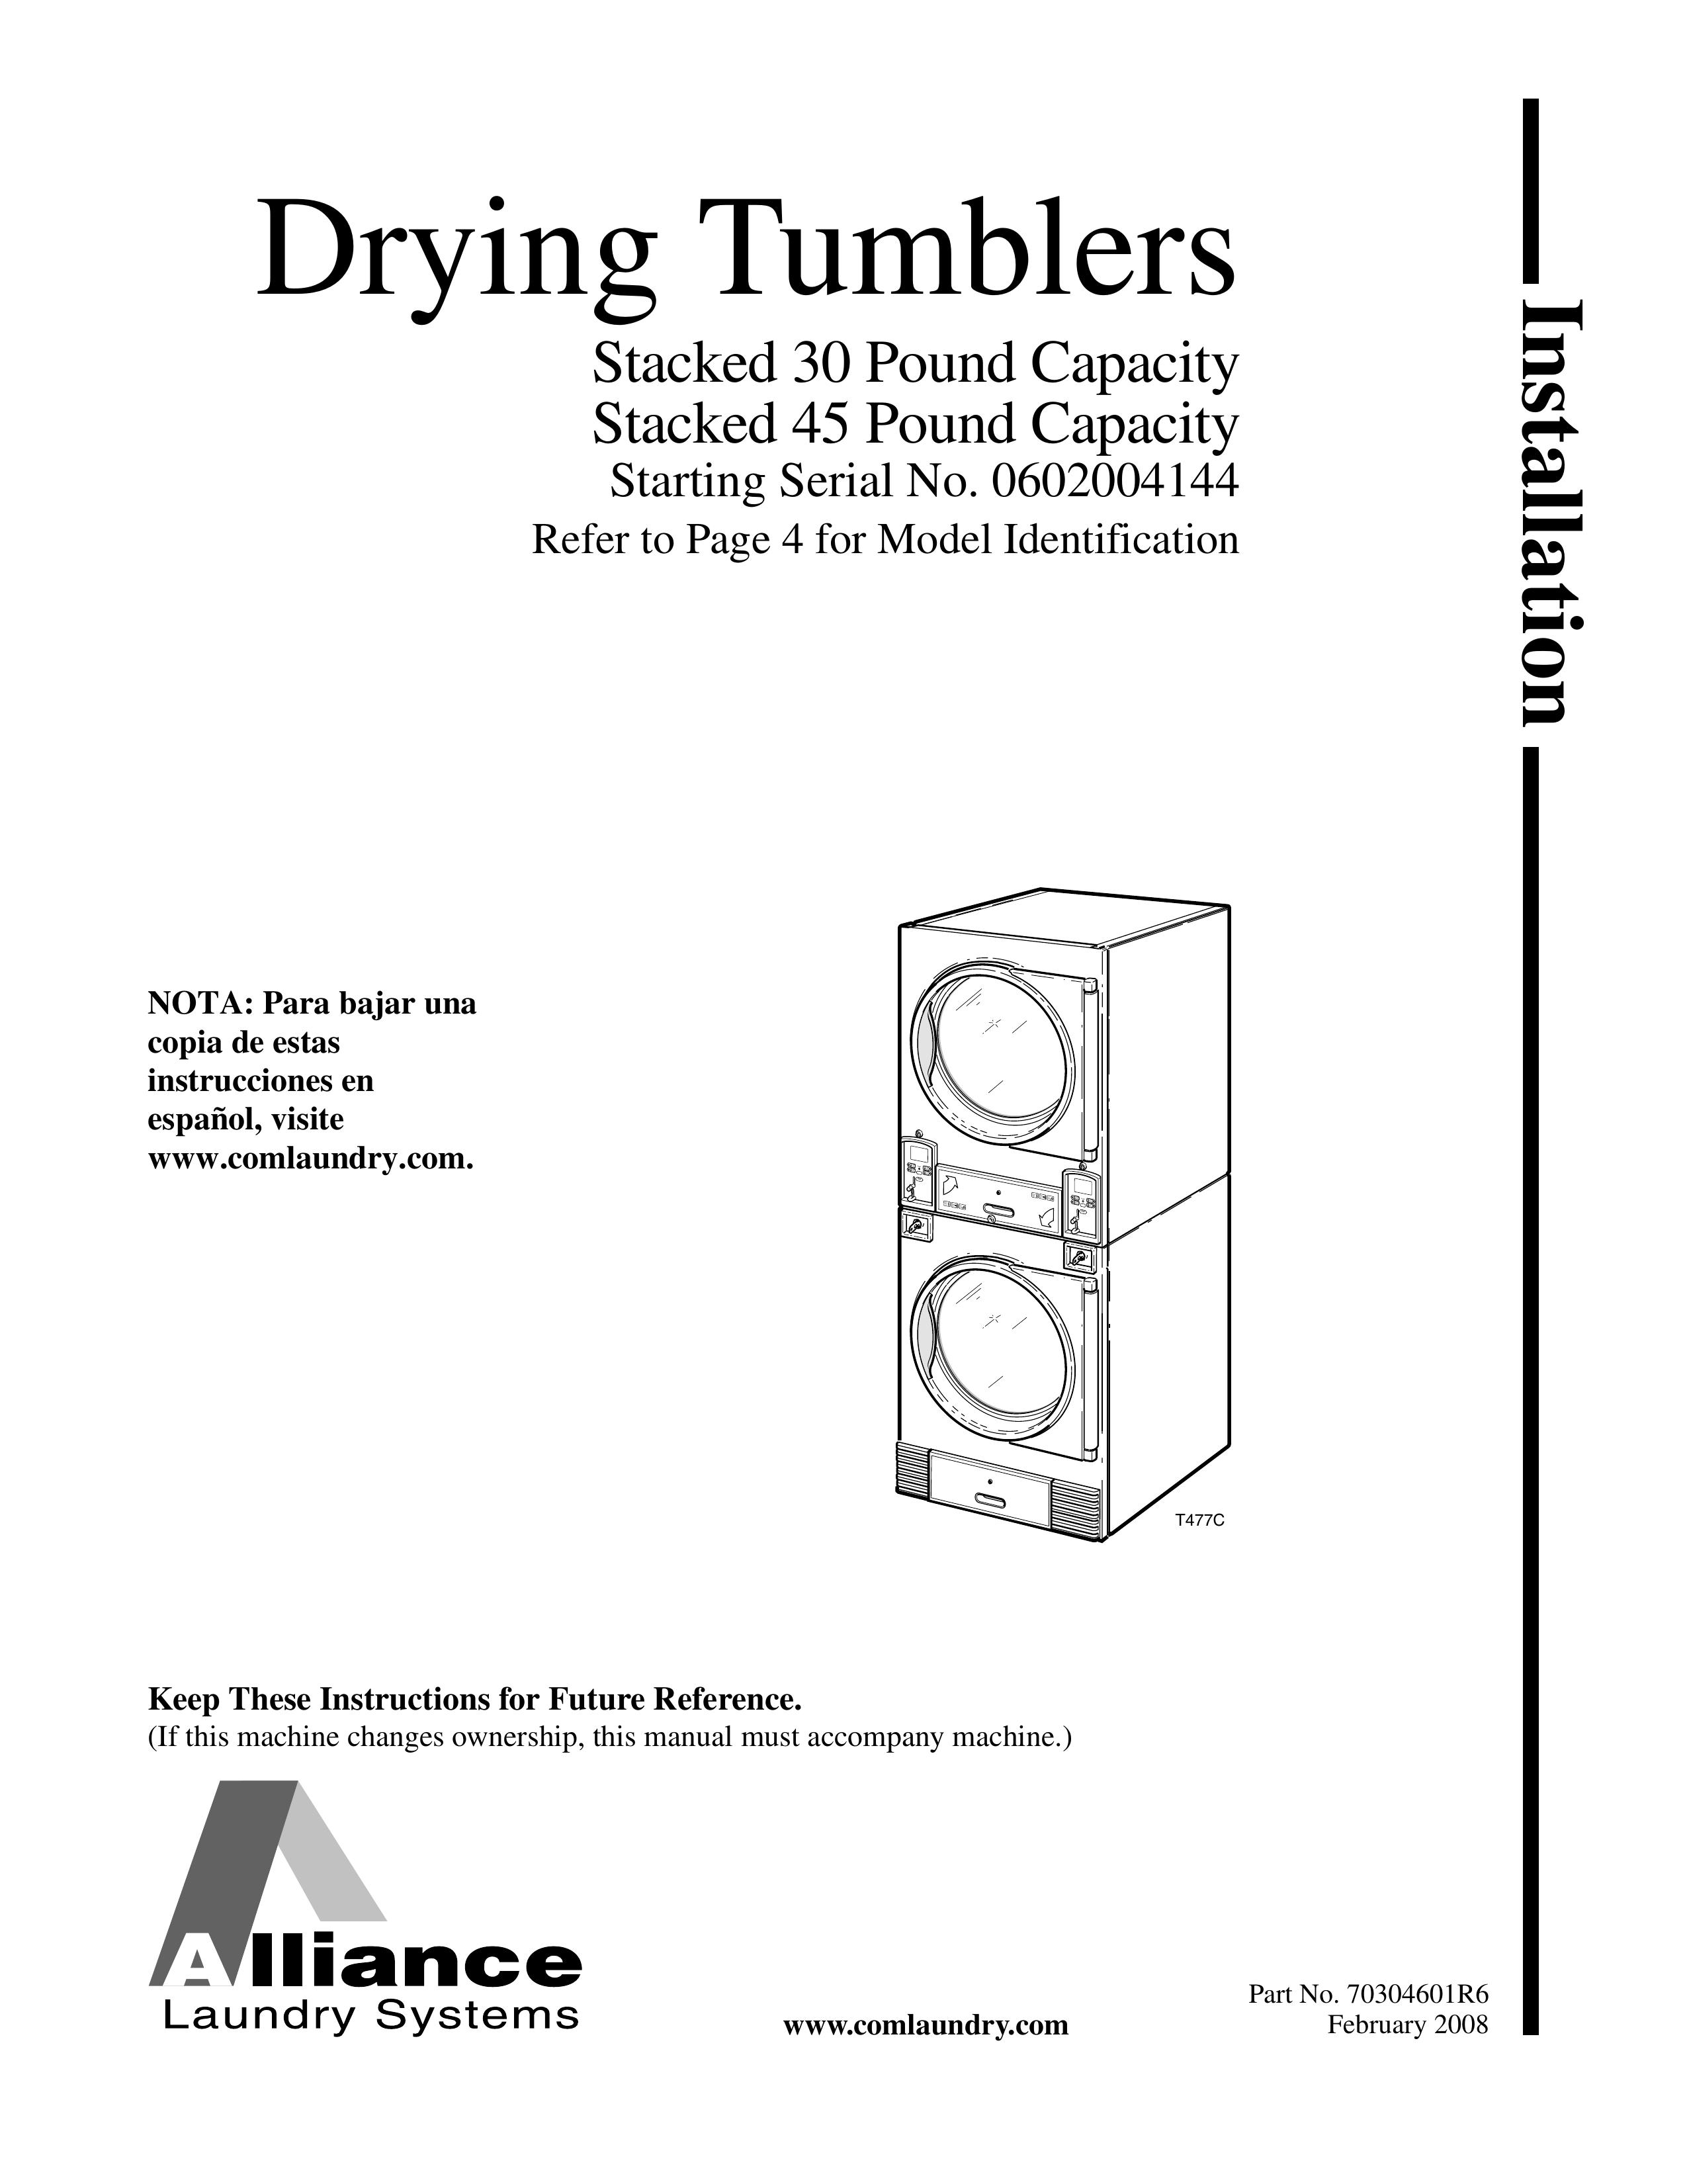 Alliance Laundry Systems Drying Cabinet Clothes Dryer User Manual